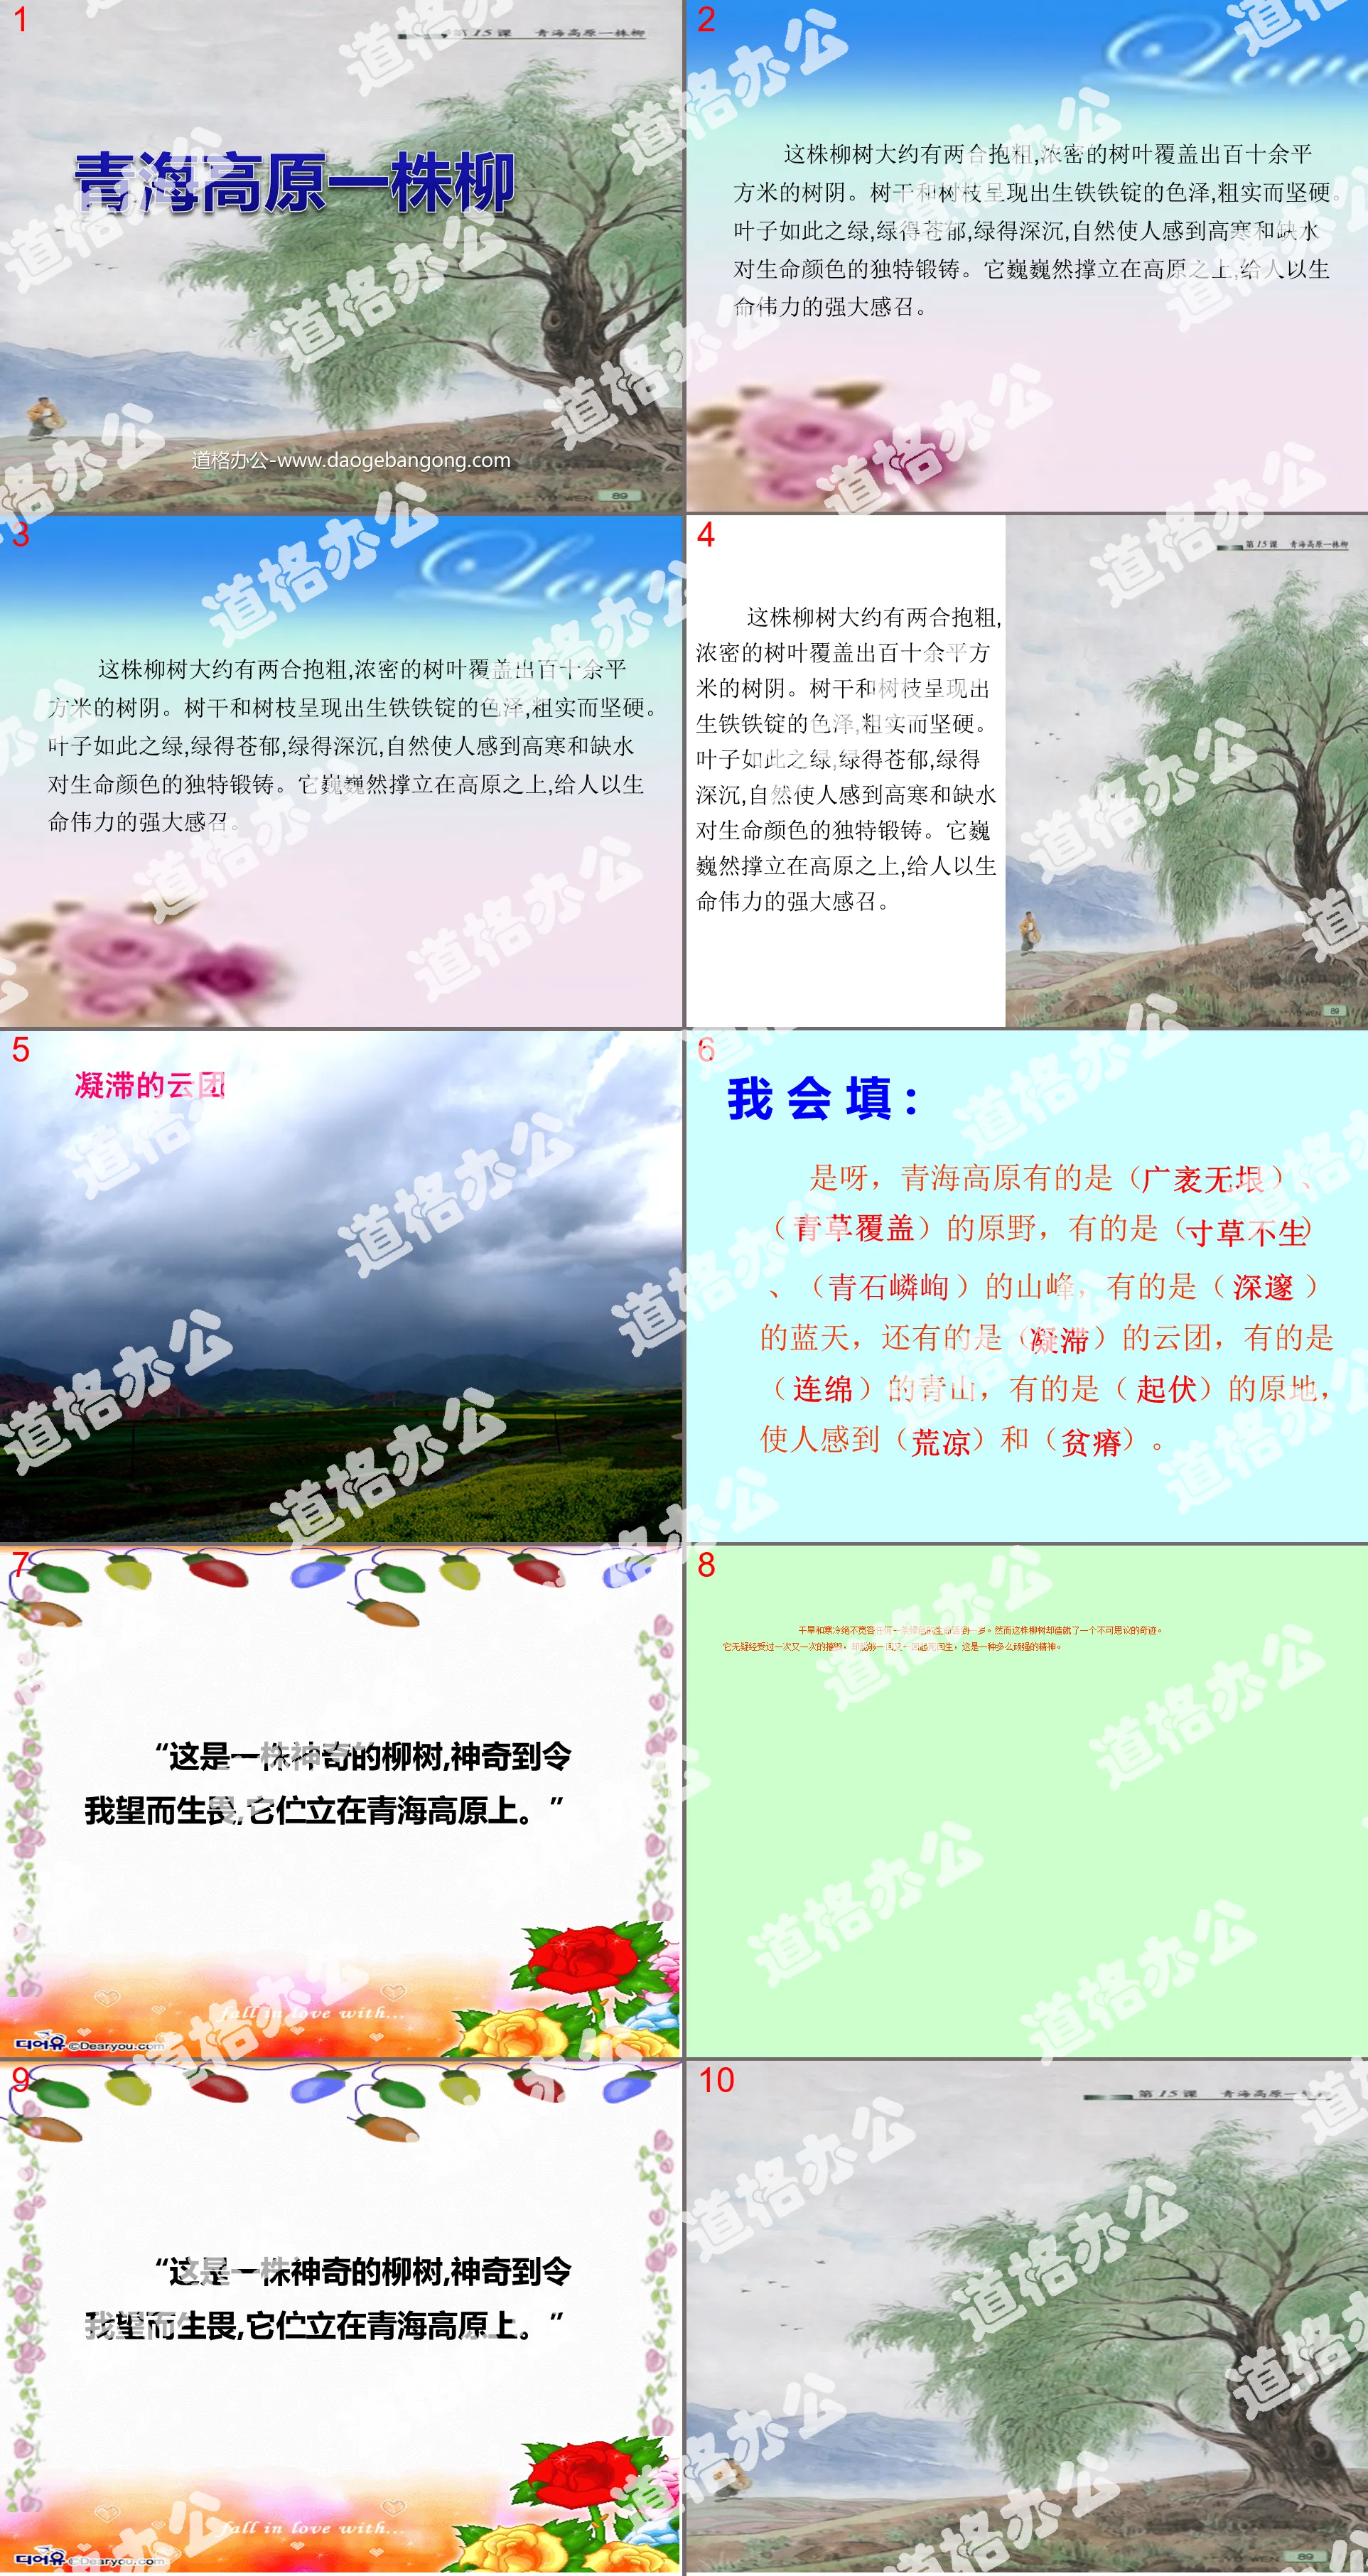 "A Willow on the Qinghai Plateau" PPT courseware